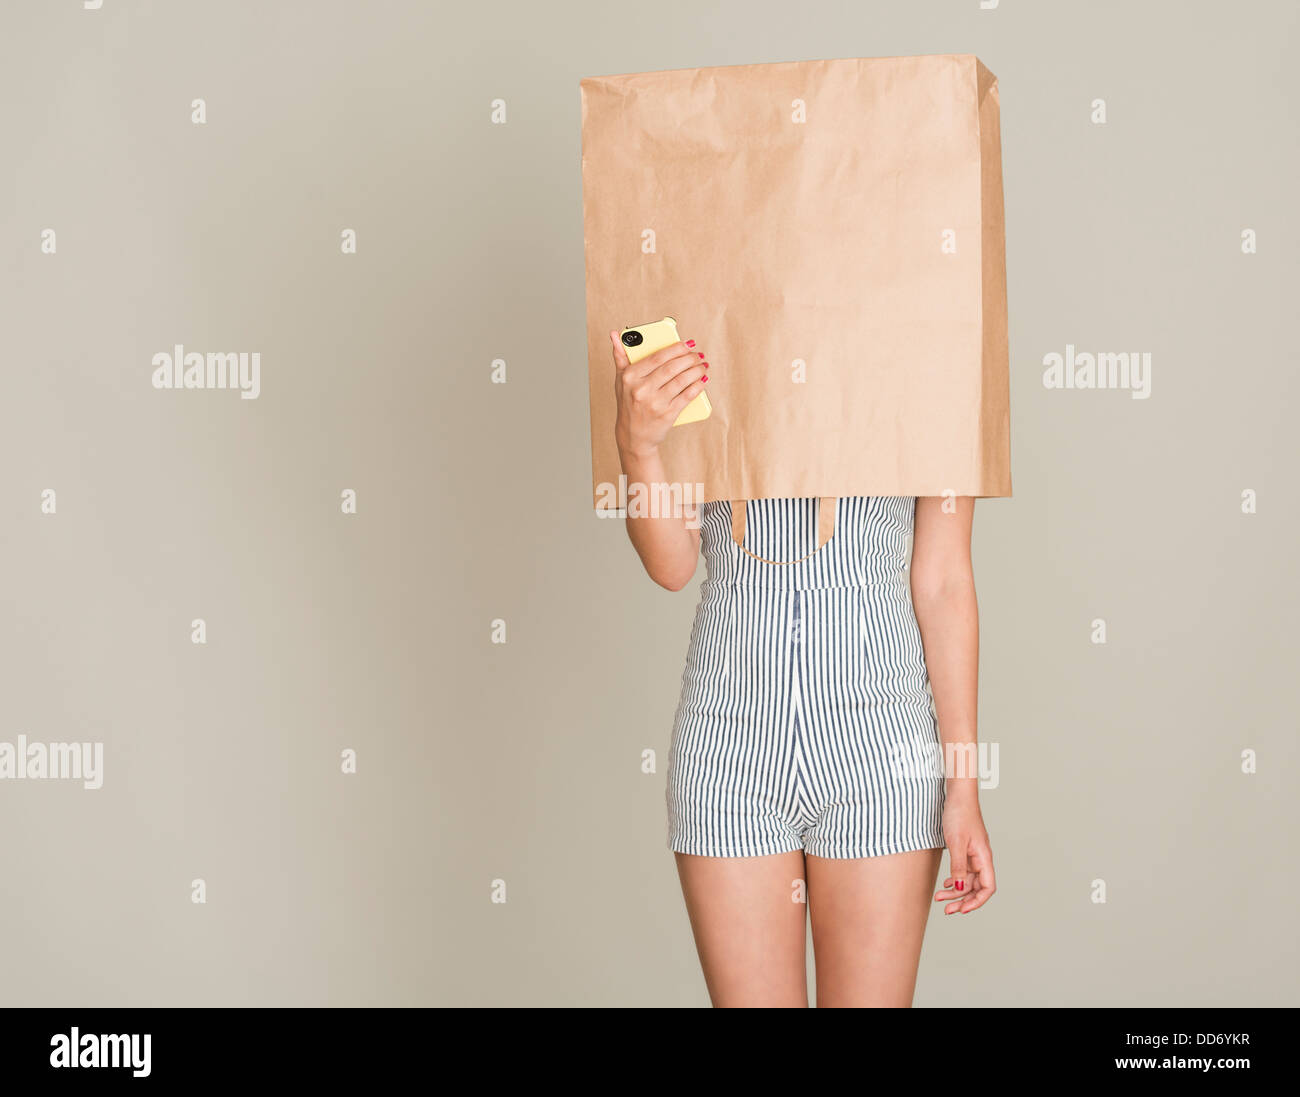 Anonymous caller. Young woman with paper bag over her head holding a mobile phone. Stock Photo